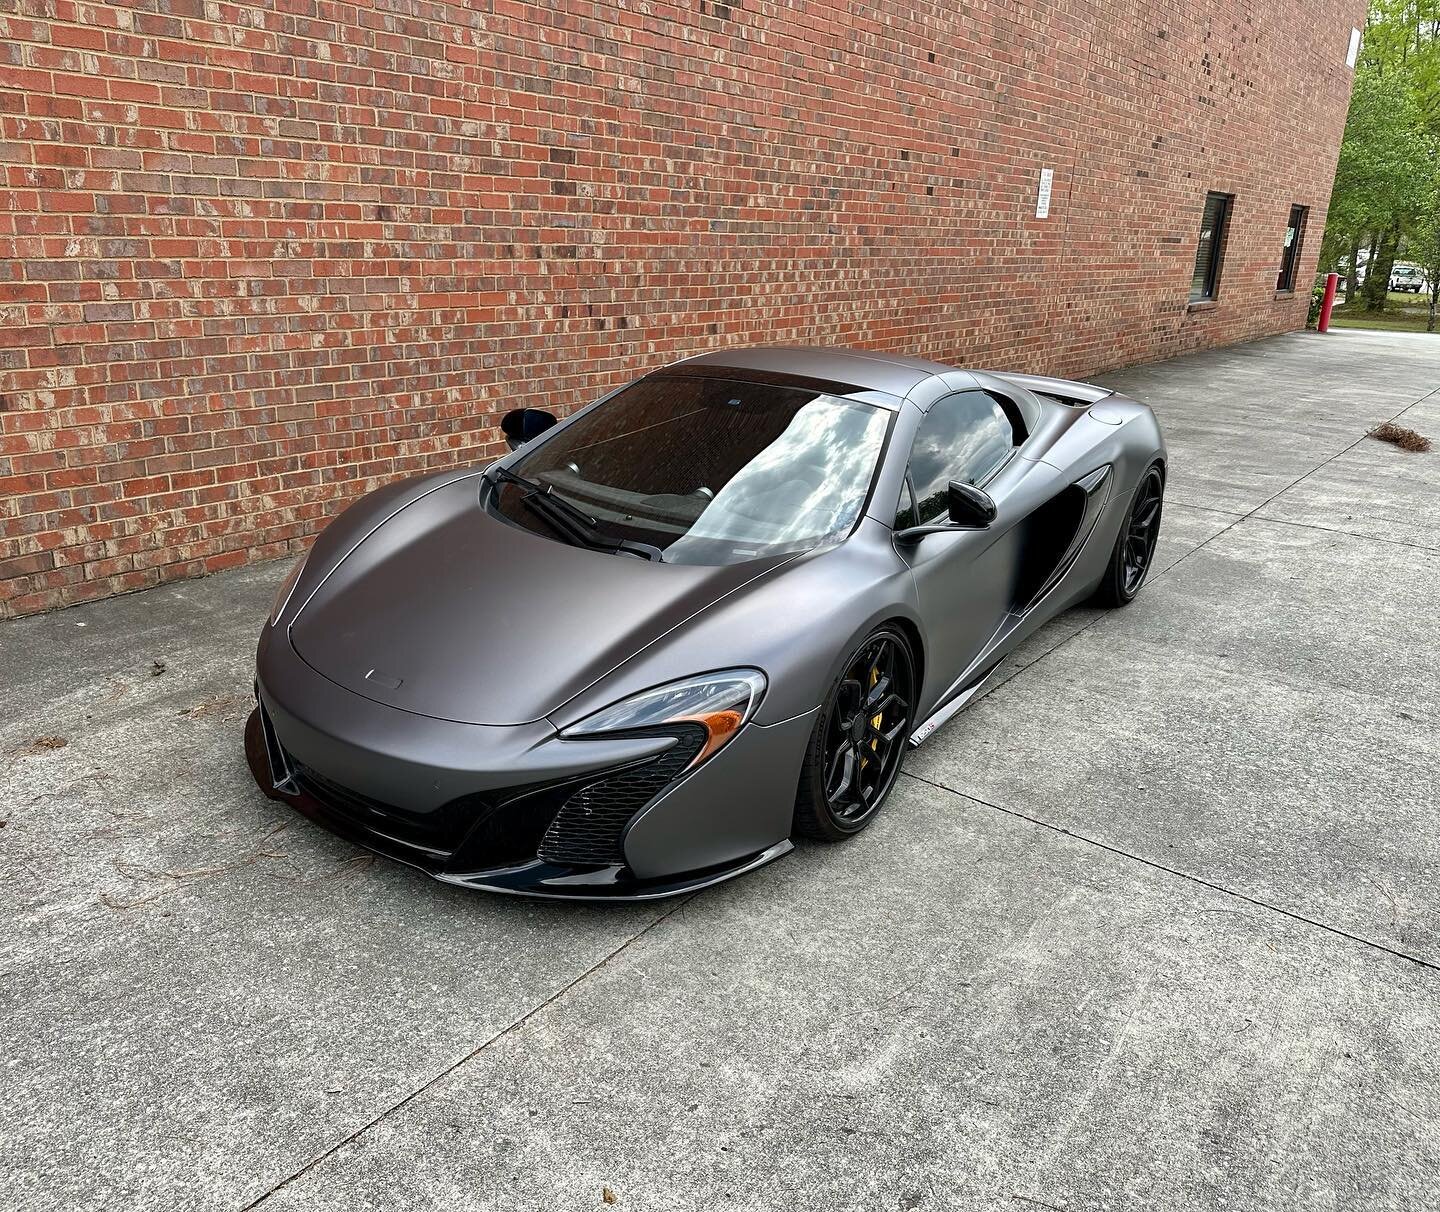 #satincharcoalmetallic is the most popular color of the moment! Comment if you agree!
.
.
.
#mclaren #mclare650s #650s #650sspider #exoticcars #supercar #motorcars #eatsleepwrap #itsawrap #layednotsprayed #topcarwraps #atl #atlanta #importcar